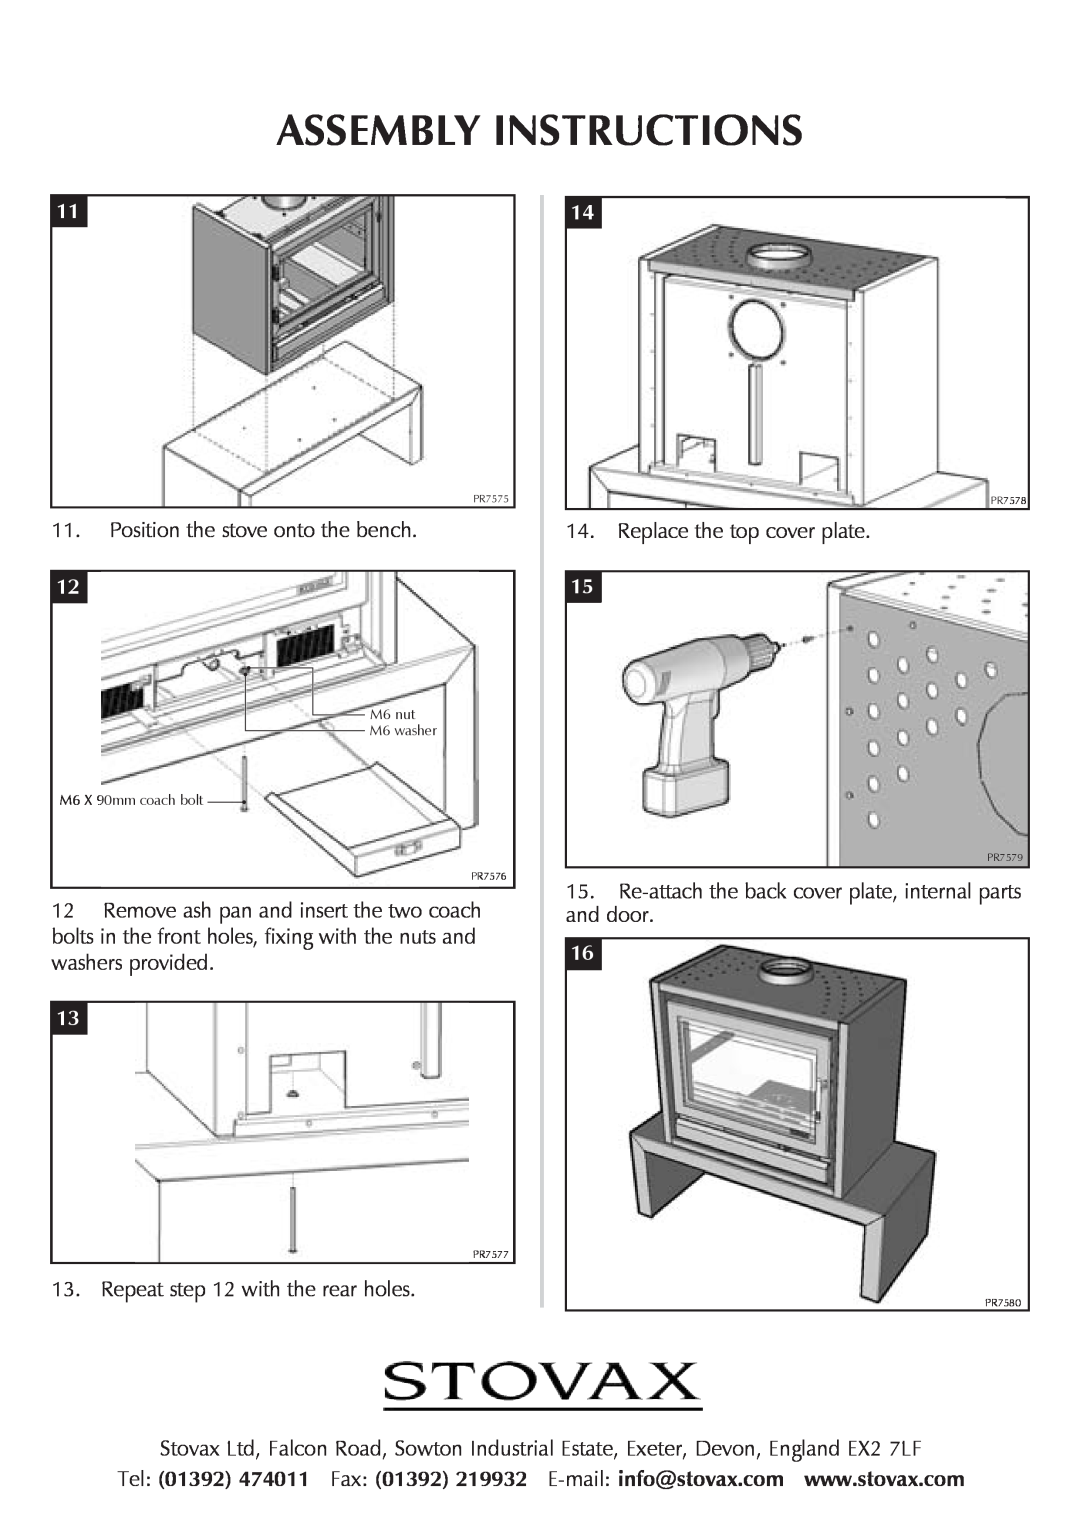 Stovax RVACB45B, RVACB100B, RVACB120B installation instructions Assembly Instructions, Position the stove onto the bench 